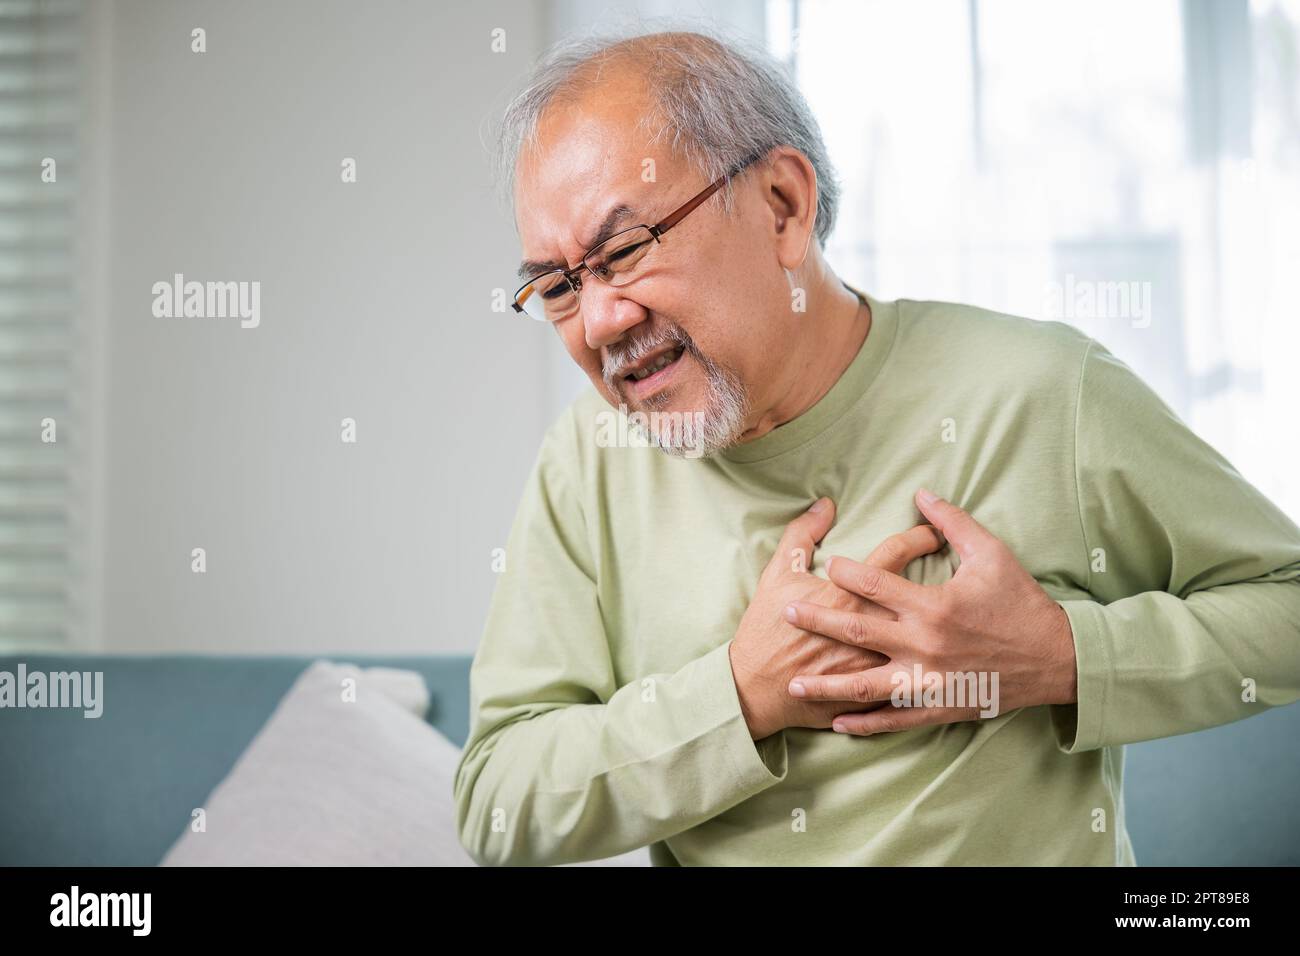 Senior man bad pain hand touching chest having heart attack, Asian older man have congenital disease suffering from heartache alone at home his heart Stock Photo